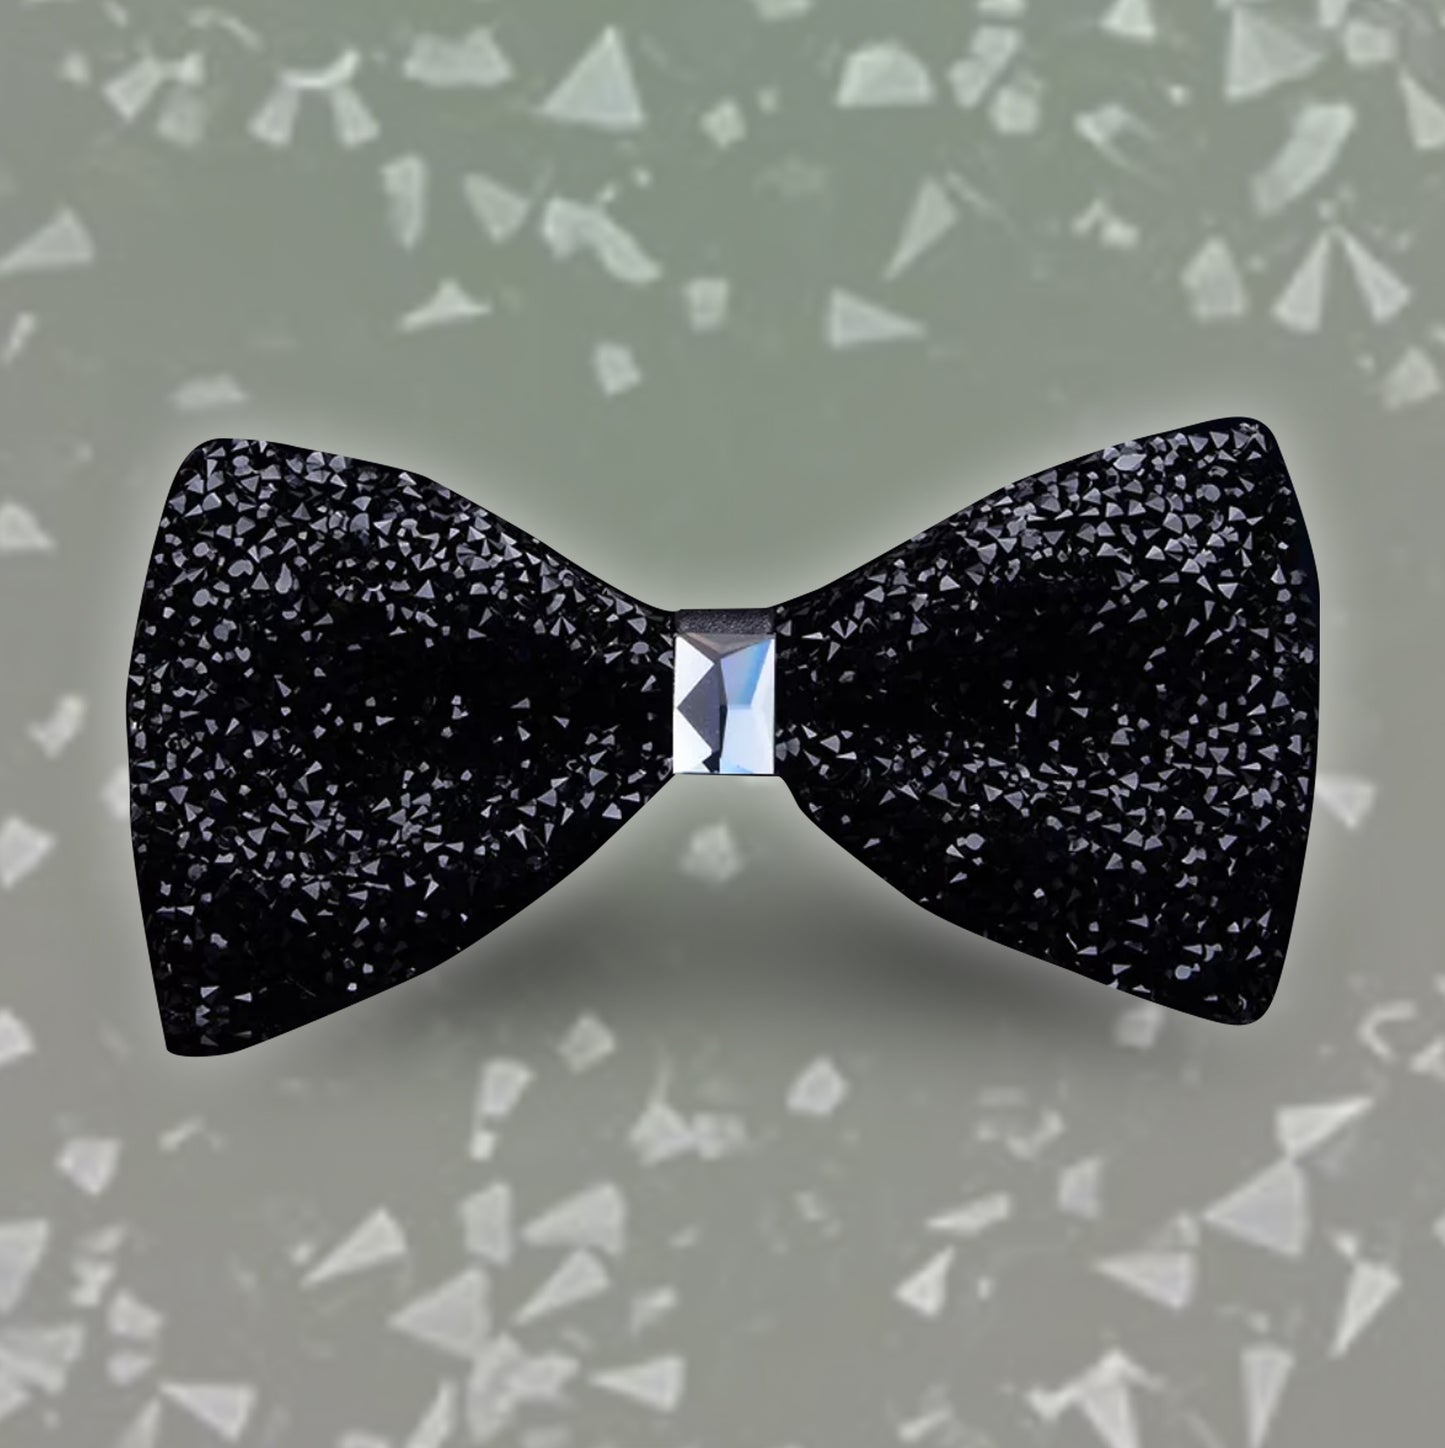 The Crystal Bling Bow-tie